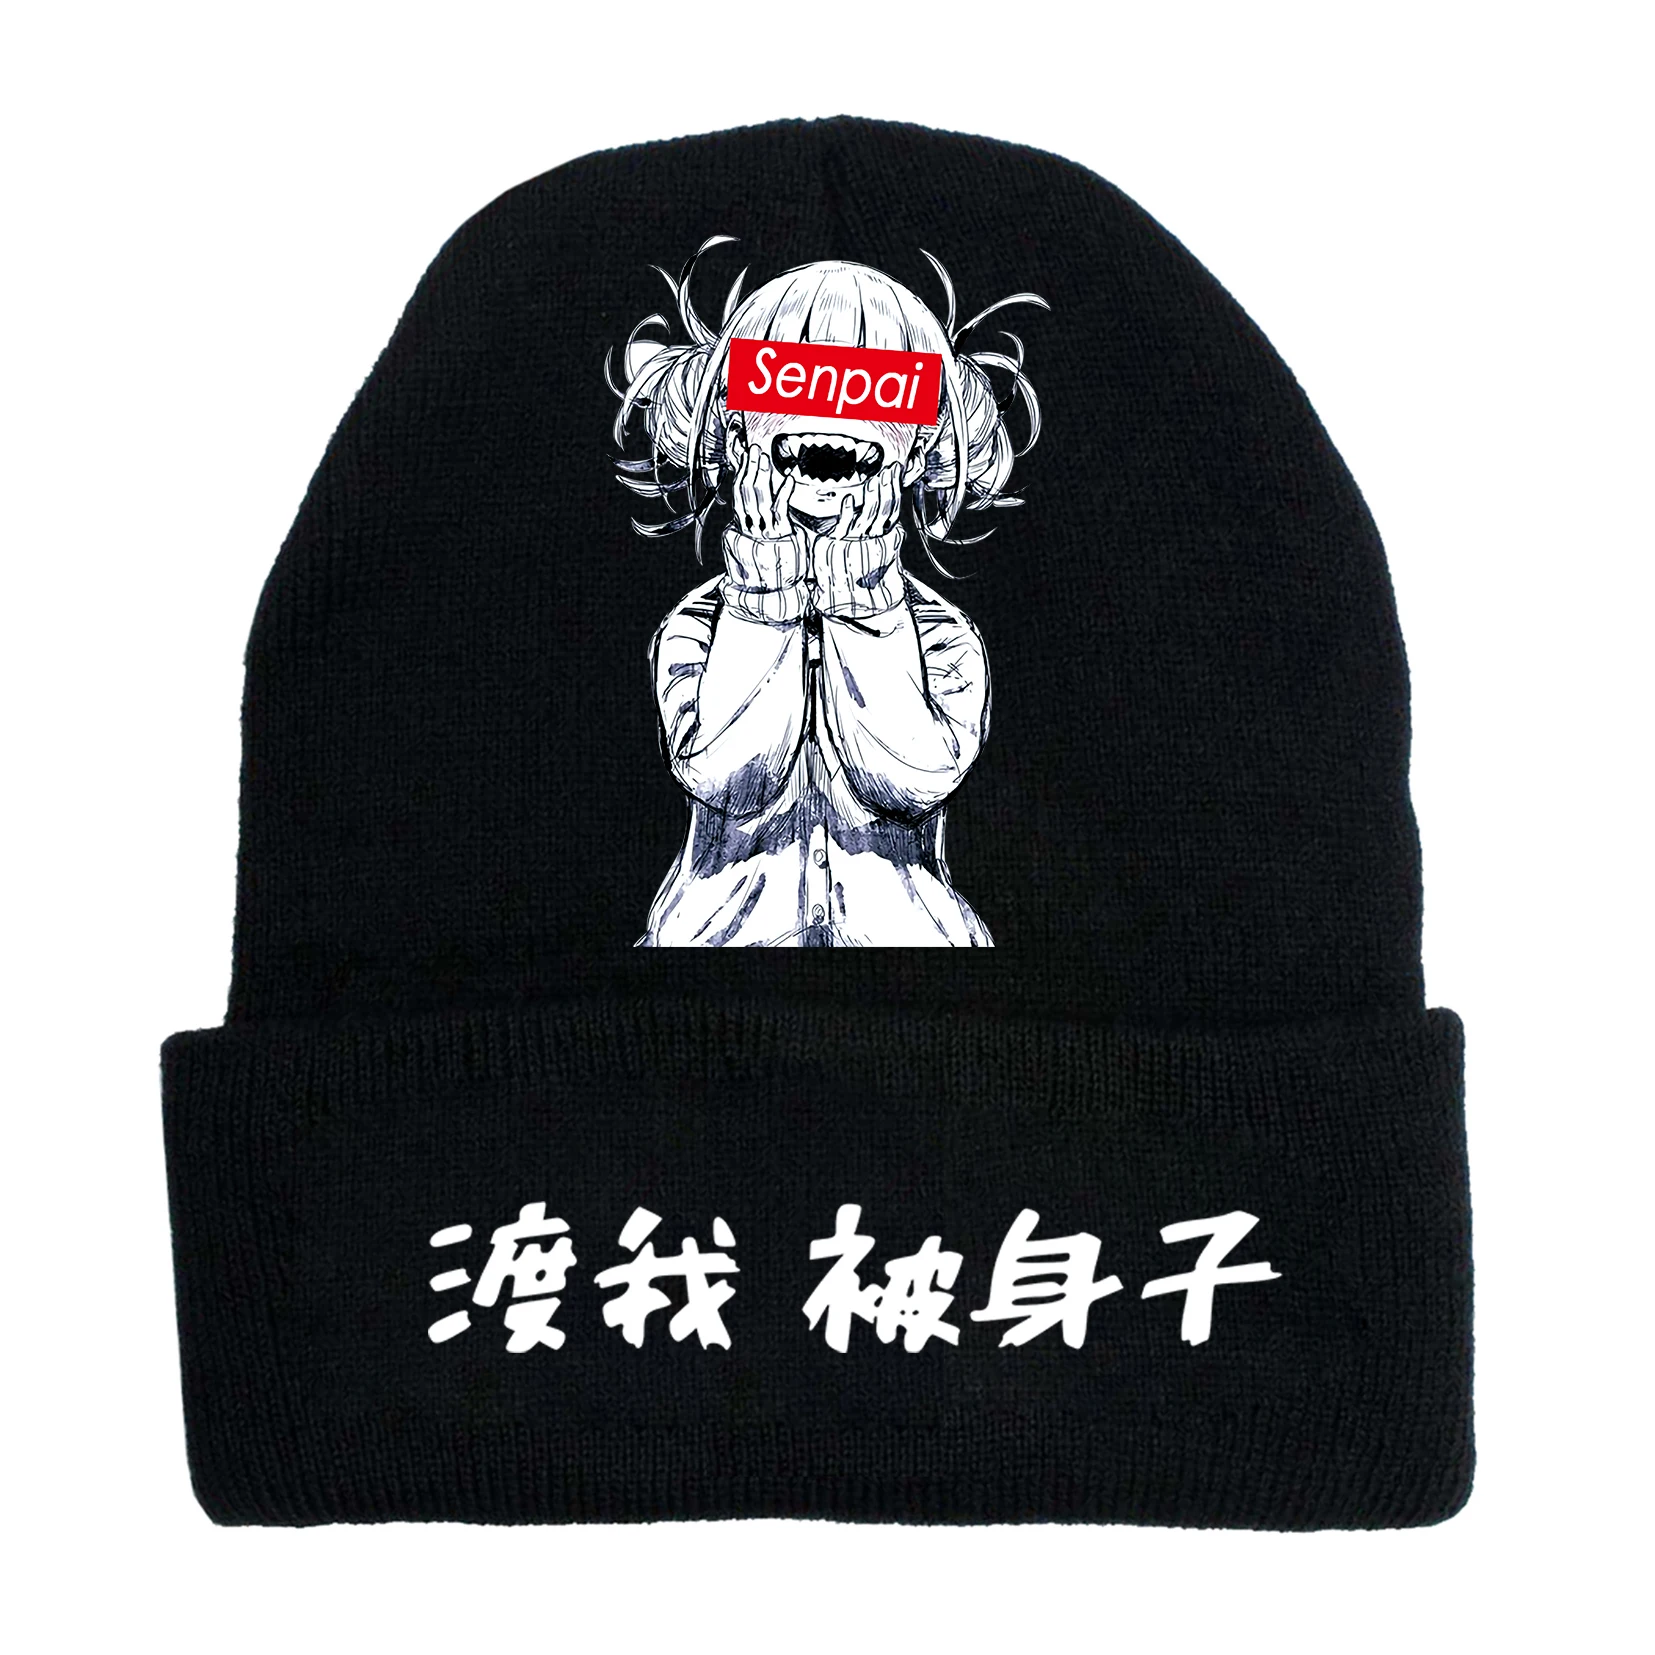 MHA Cotton Knitted Himiko Toga Print My Hero Academia Anime Casual Streetwear Solid Cute Warm Caps 2021 New Arrival Beret